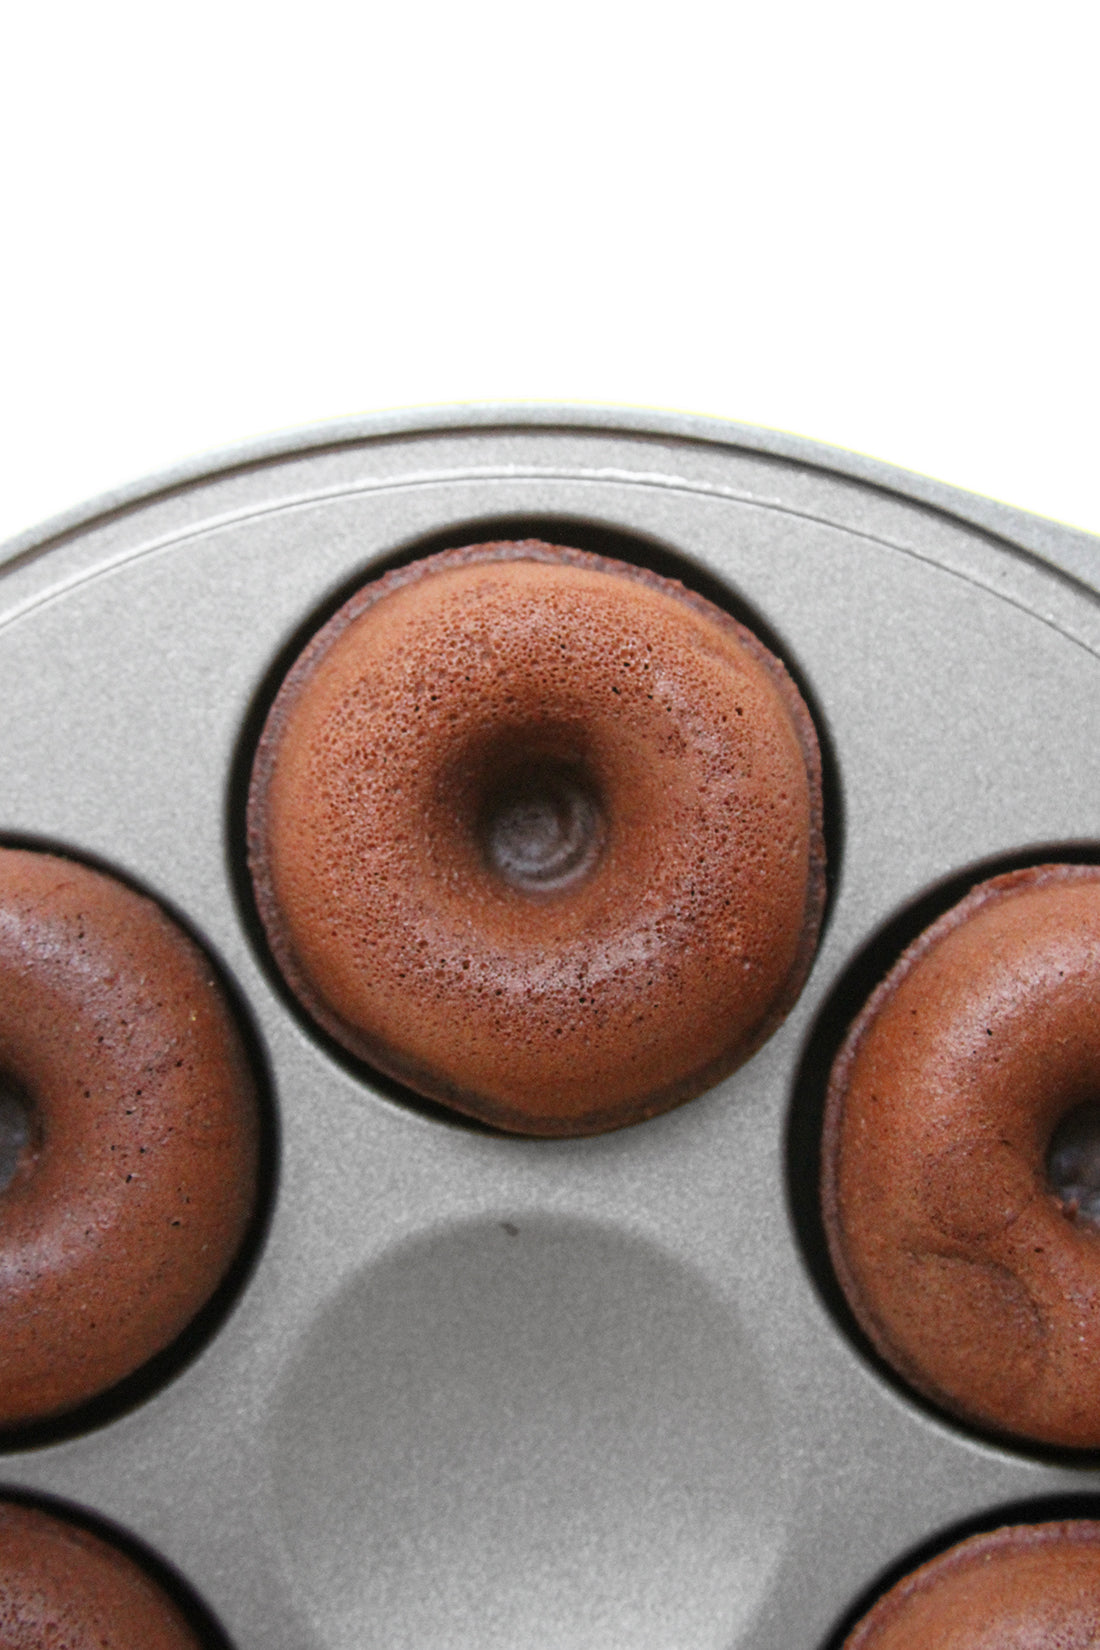 Close up Image of a donut maker with unfrosted Miss Jones Baking Co Thin Mint Donuts